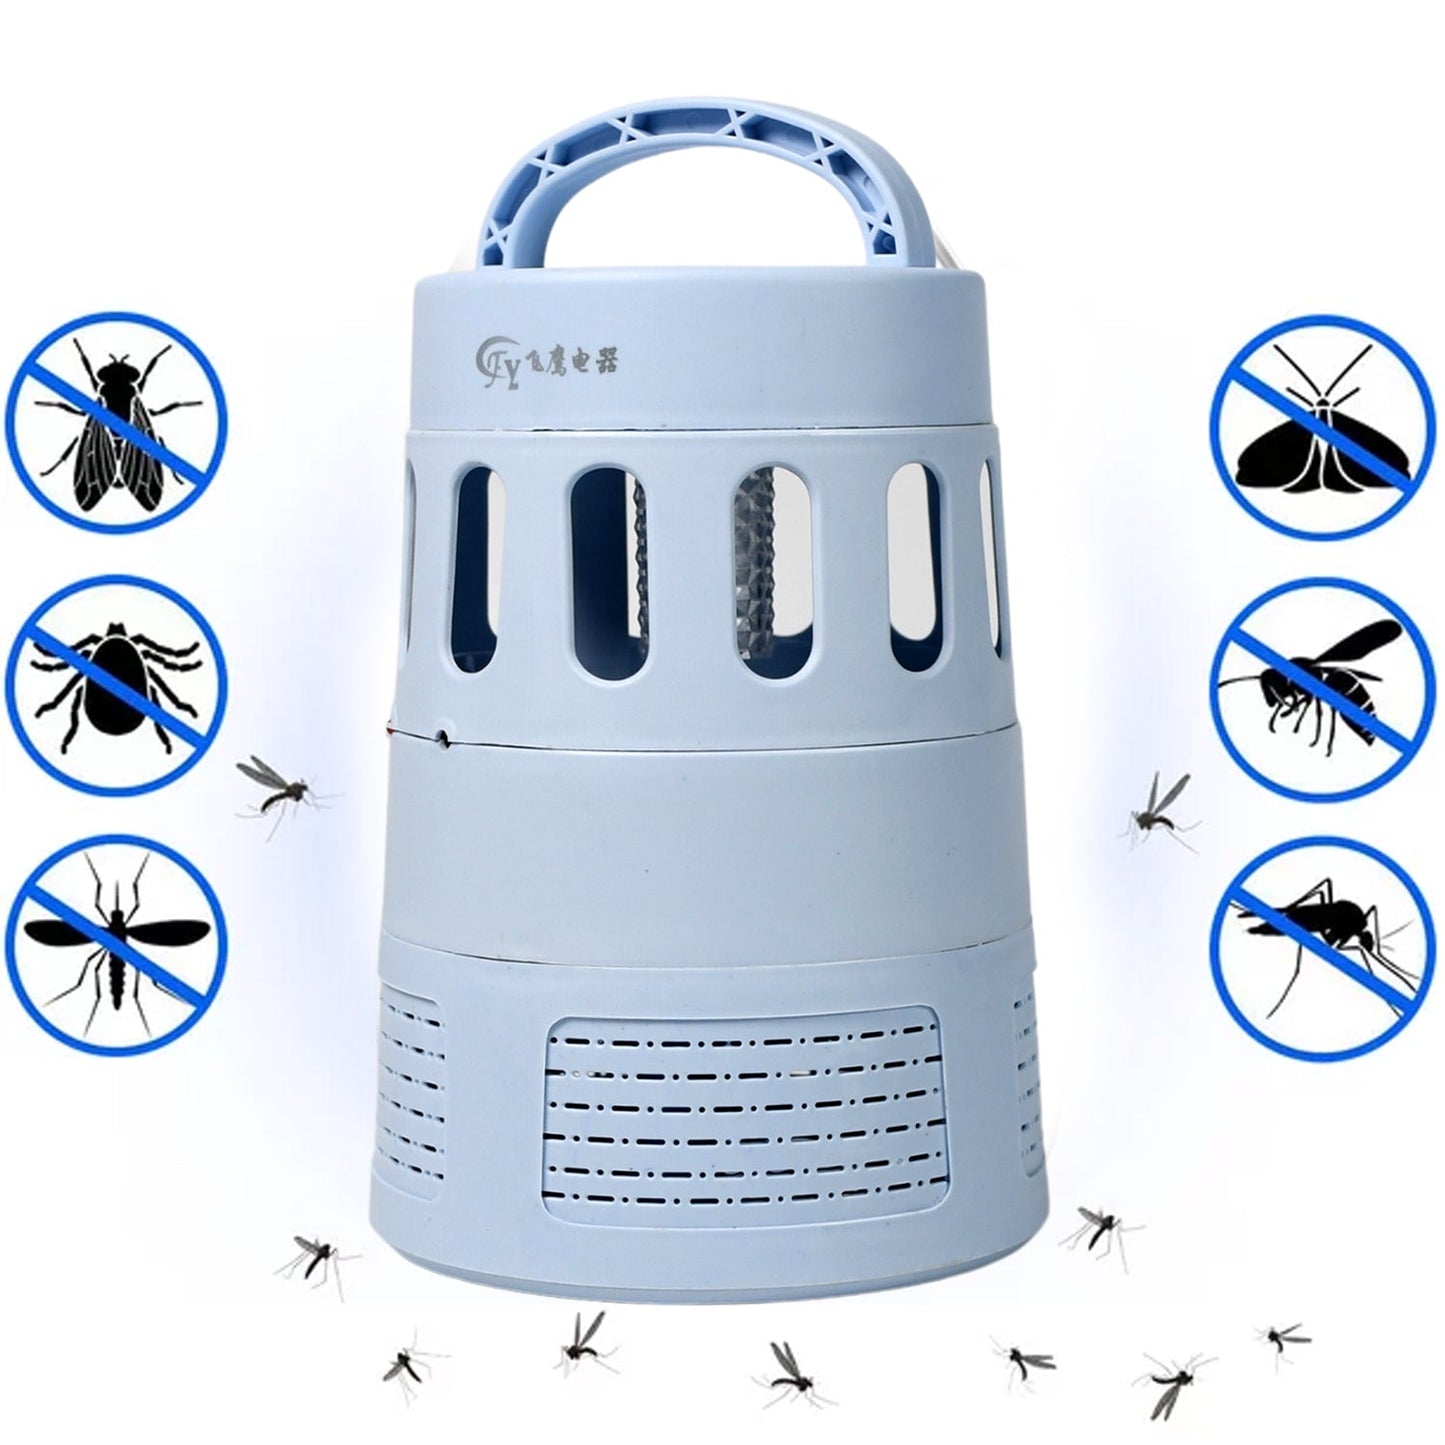 Home Indoor Bedroom Mosquito Repellent Lamp Usb Plug-In No Radiation Baby Electric Trap USB Charging